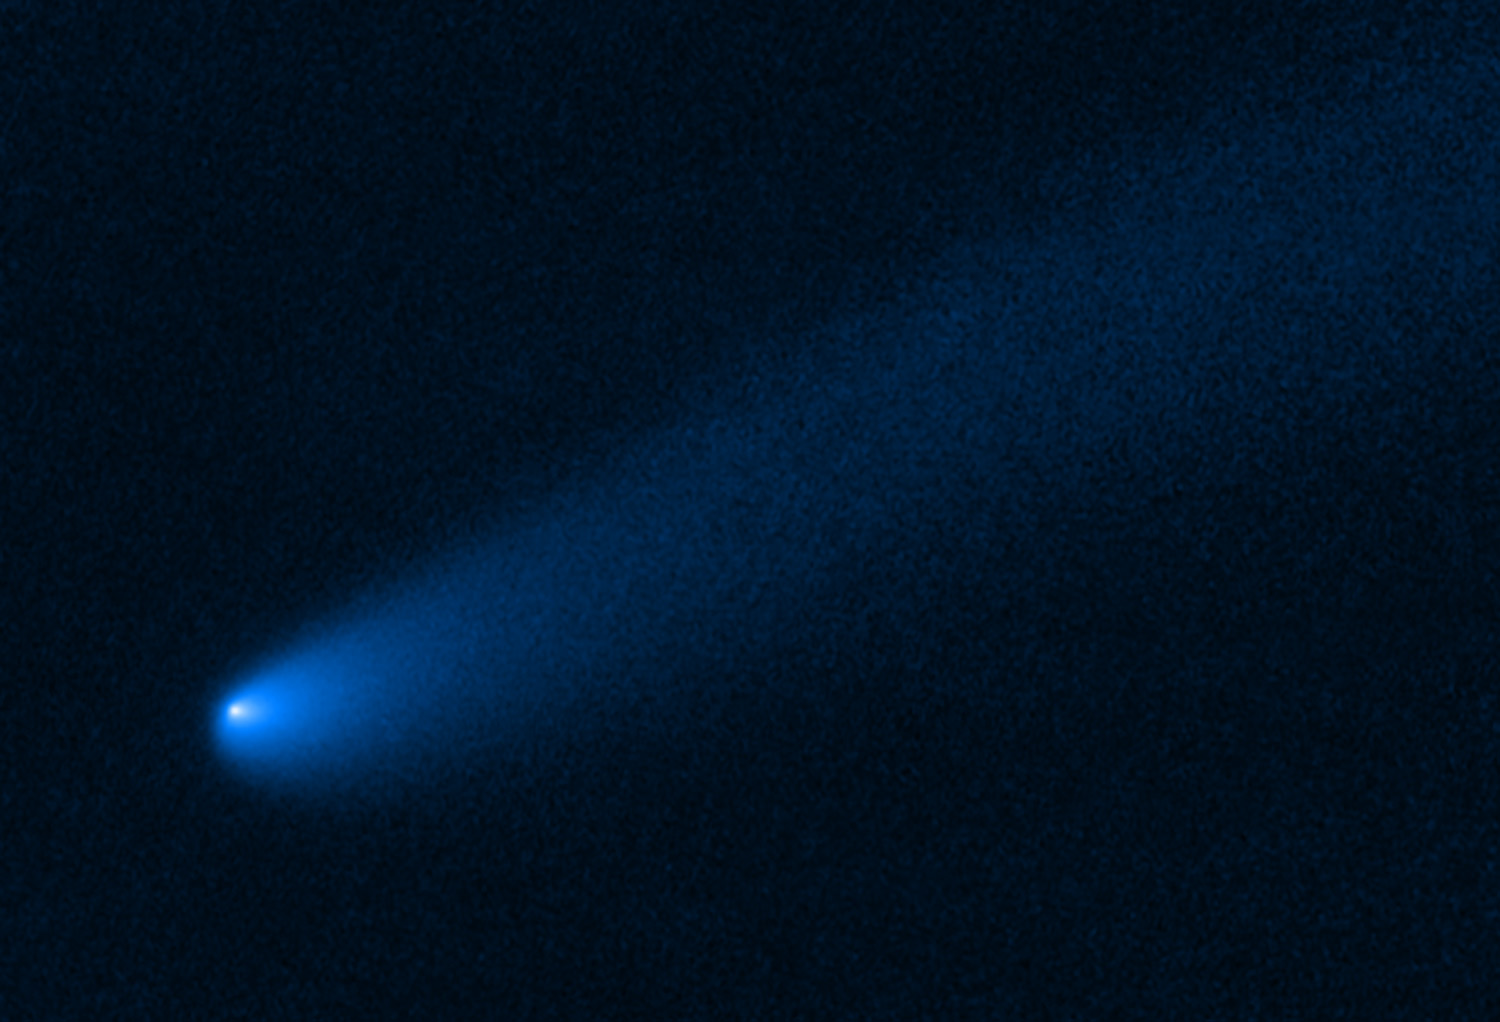 NASA’s Hubble Space Telescope snapped this image of comet P/2019 LD2, which now resides near Jupiter’s captured ancient asteroids, called Trojans. This is the first time a comet has been spotted near the Trojan population. 